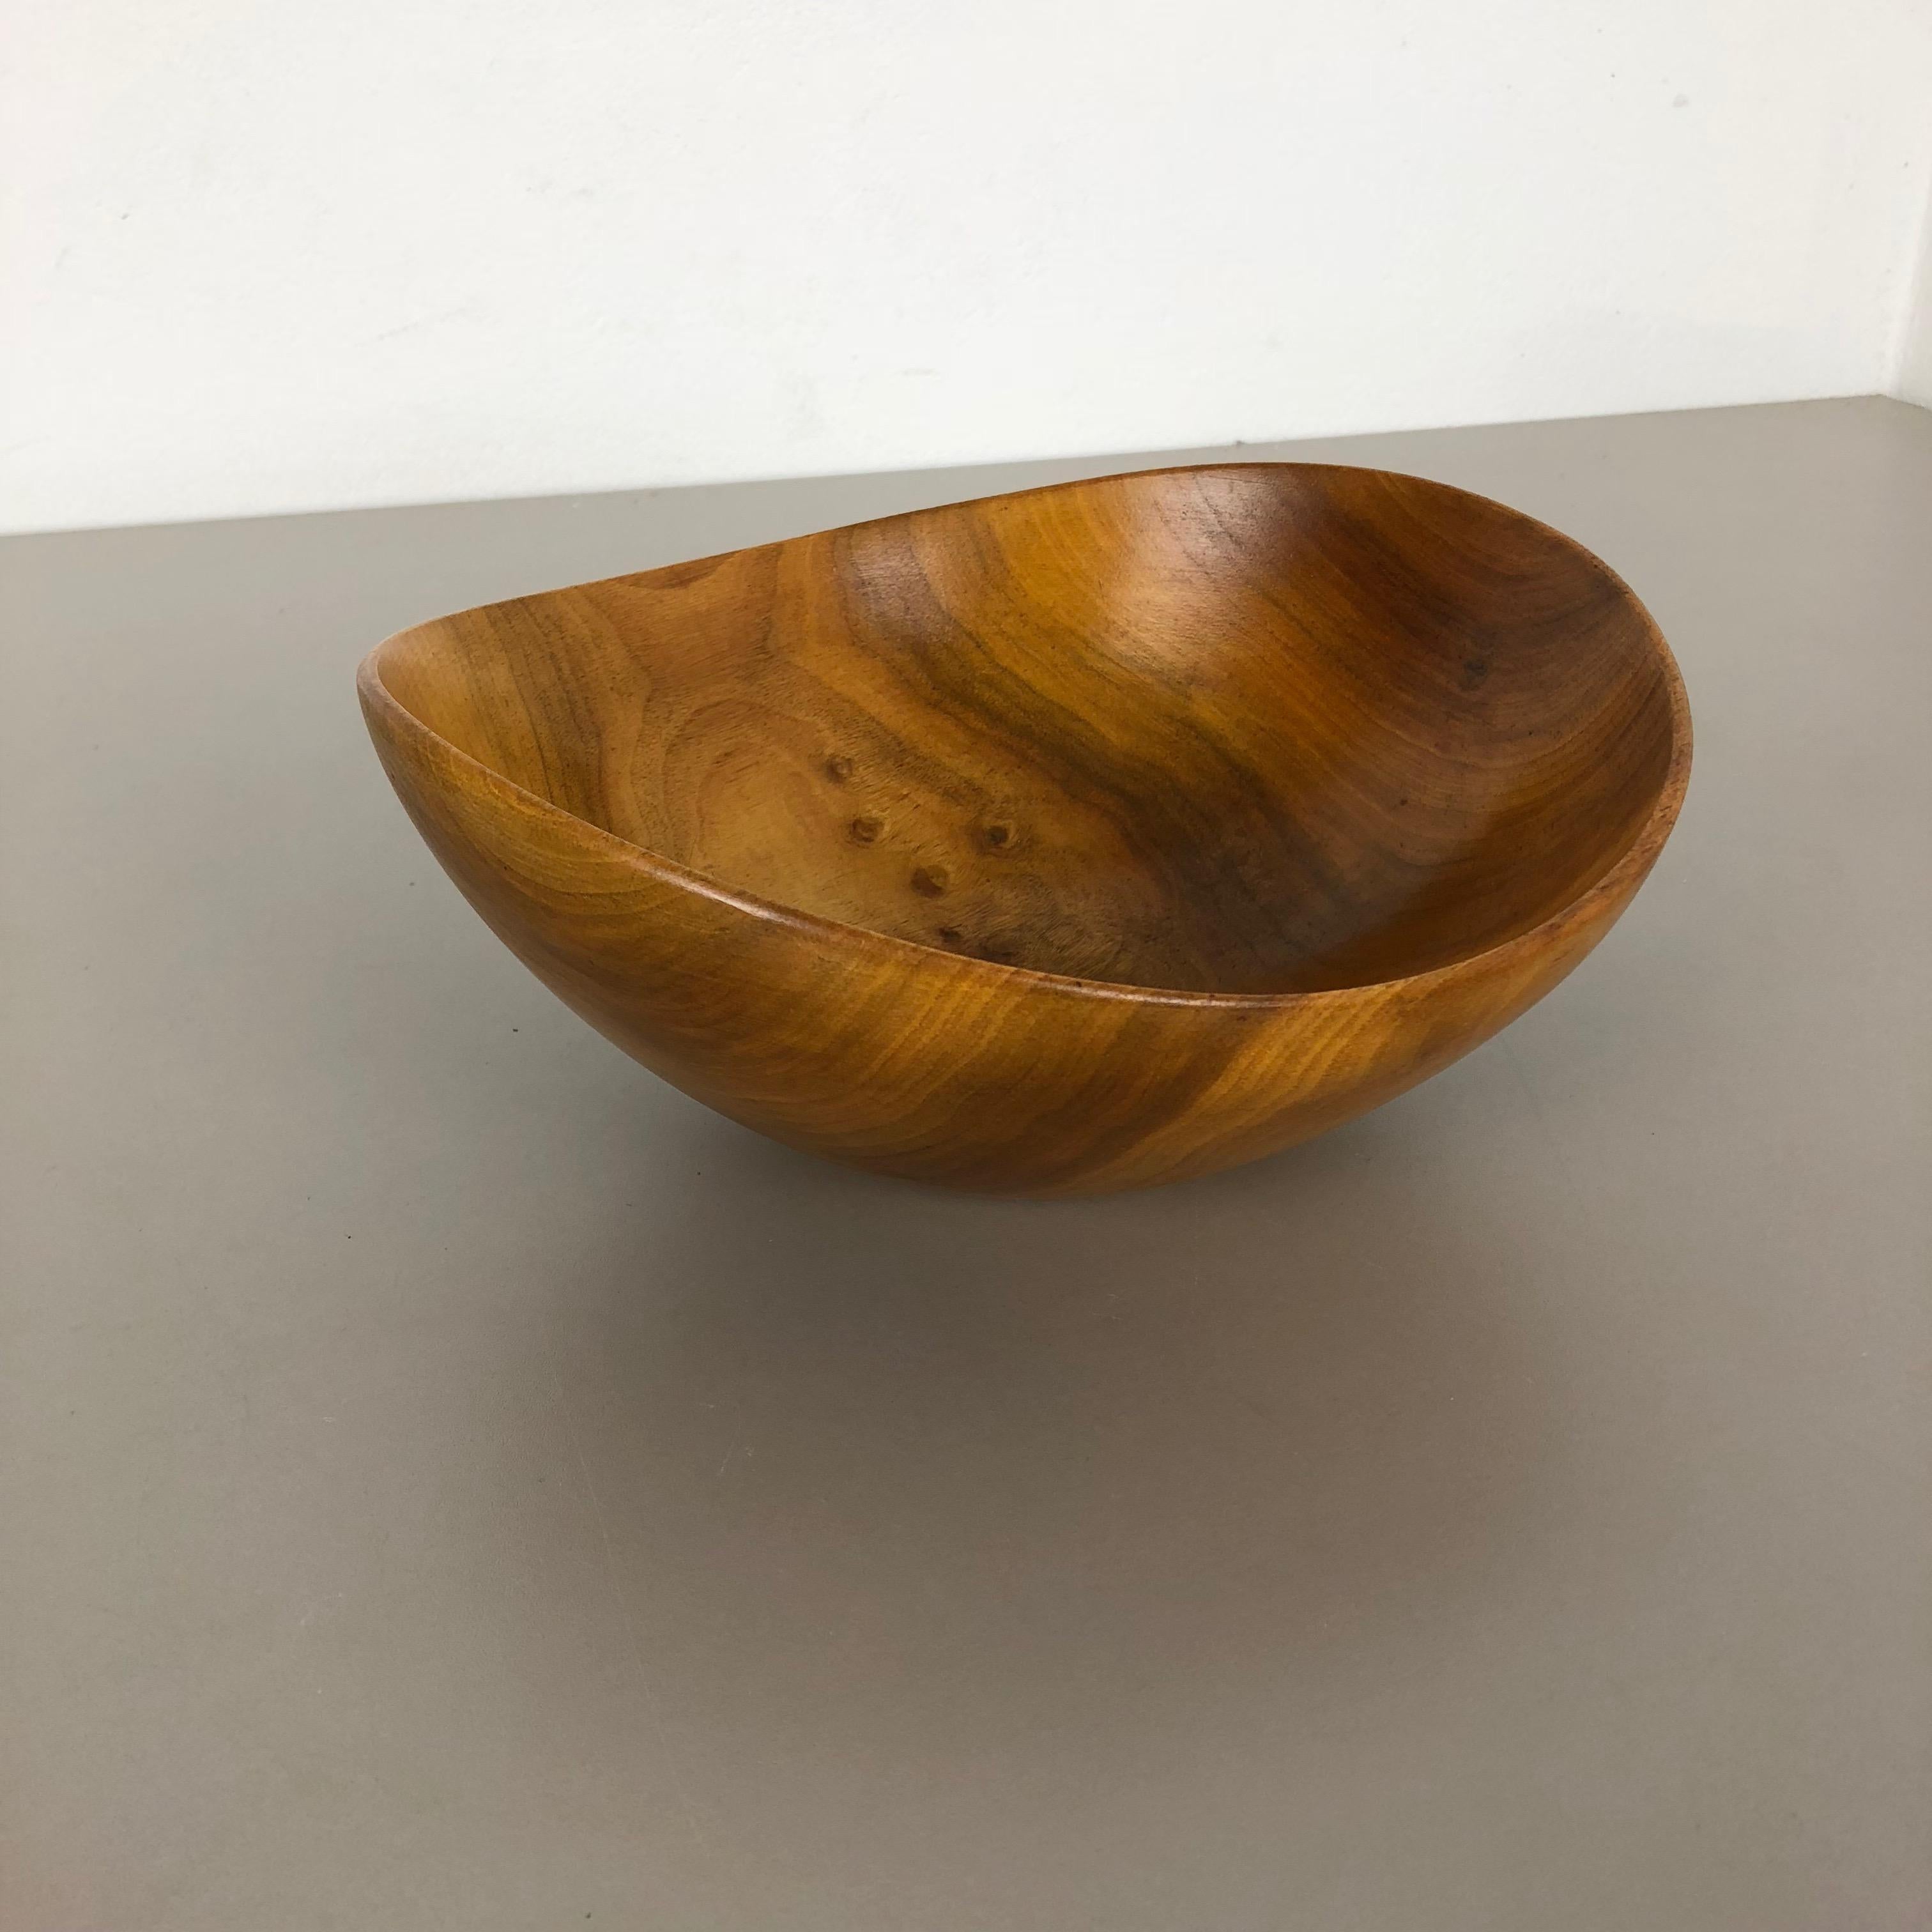 20th Century Extra Large Original Vintage Shell Bowl in Solid Walnut Wood, Germany, 1970s